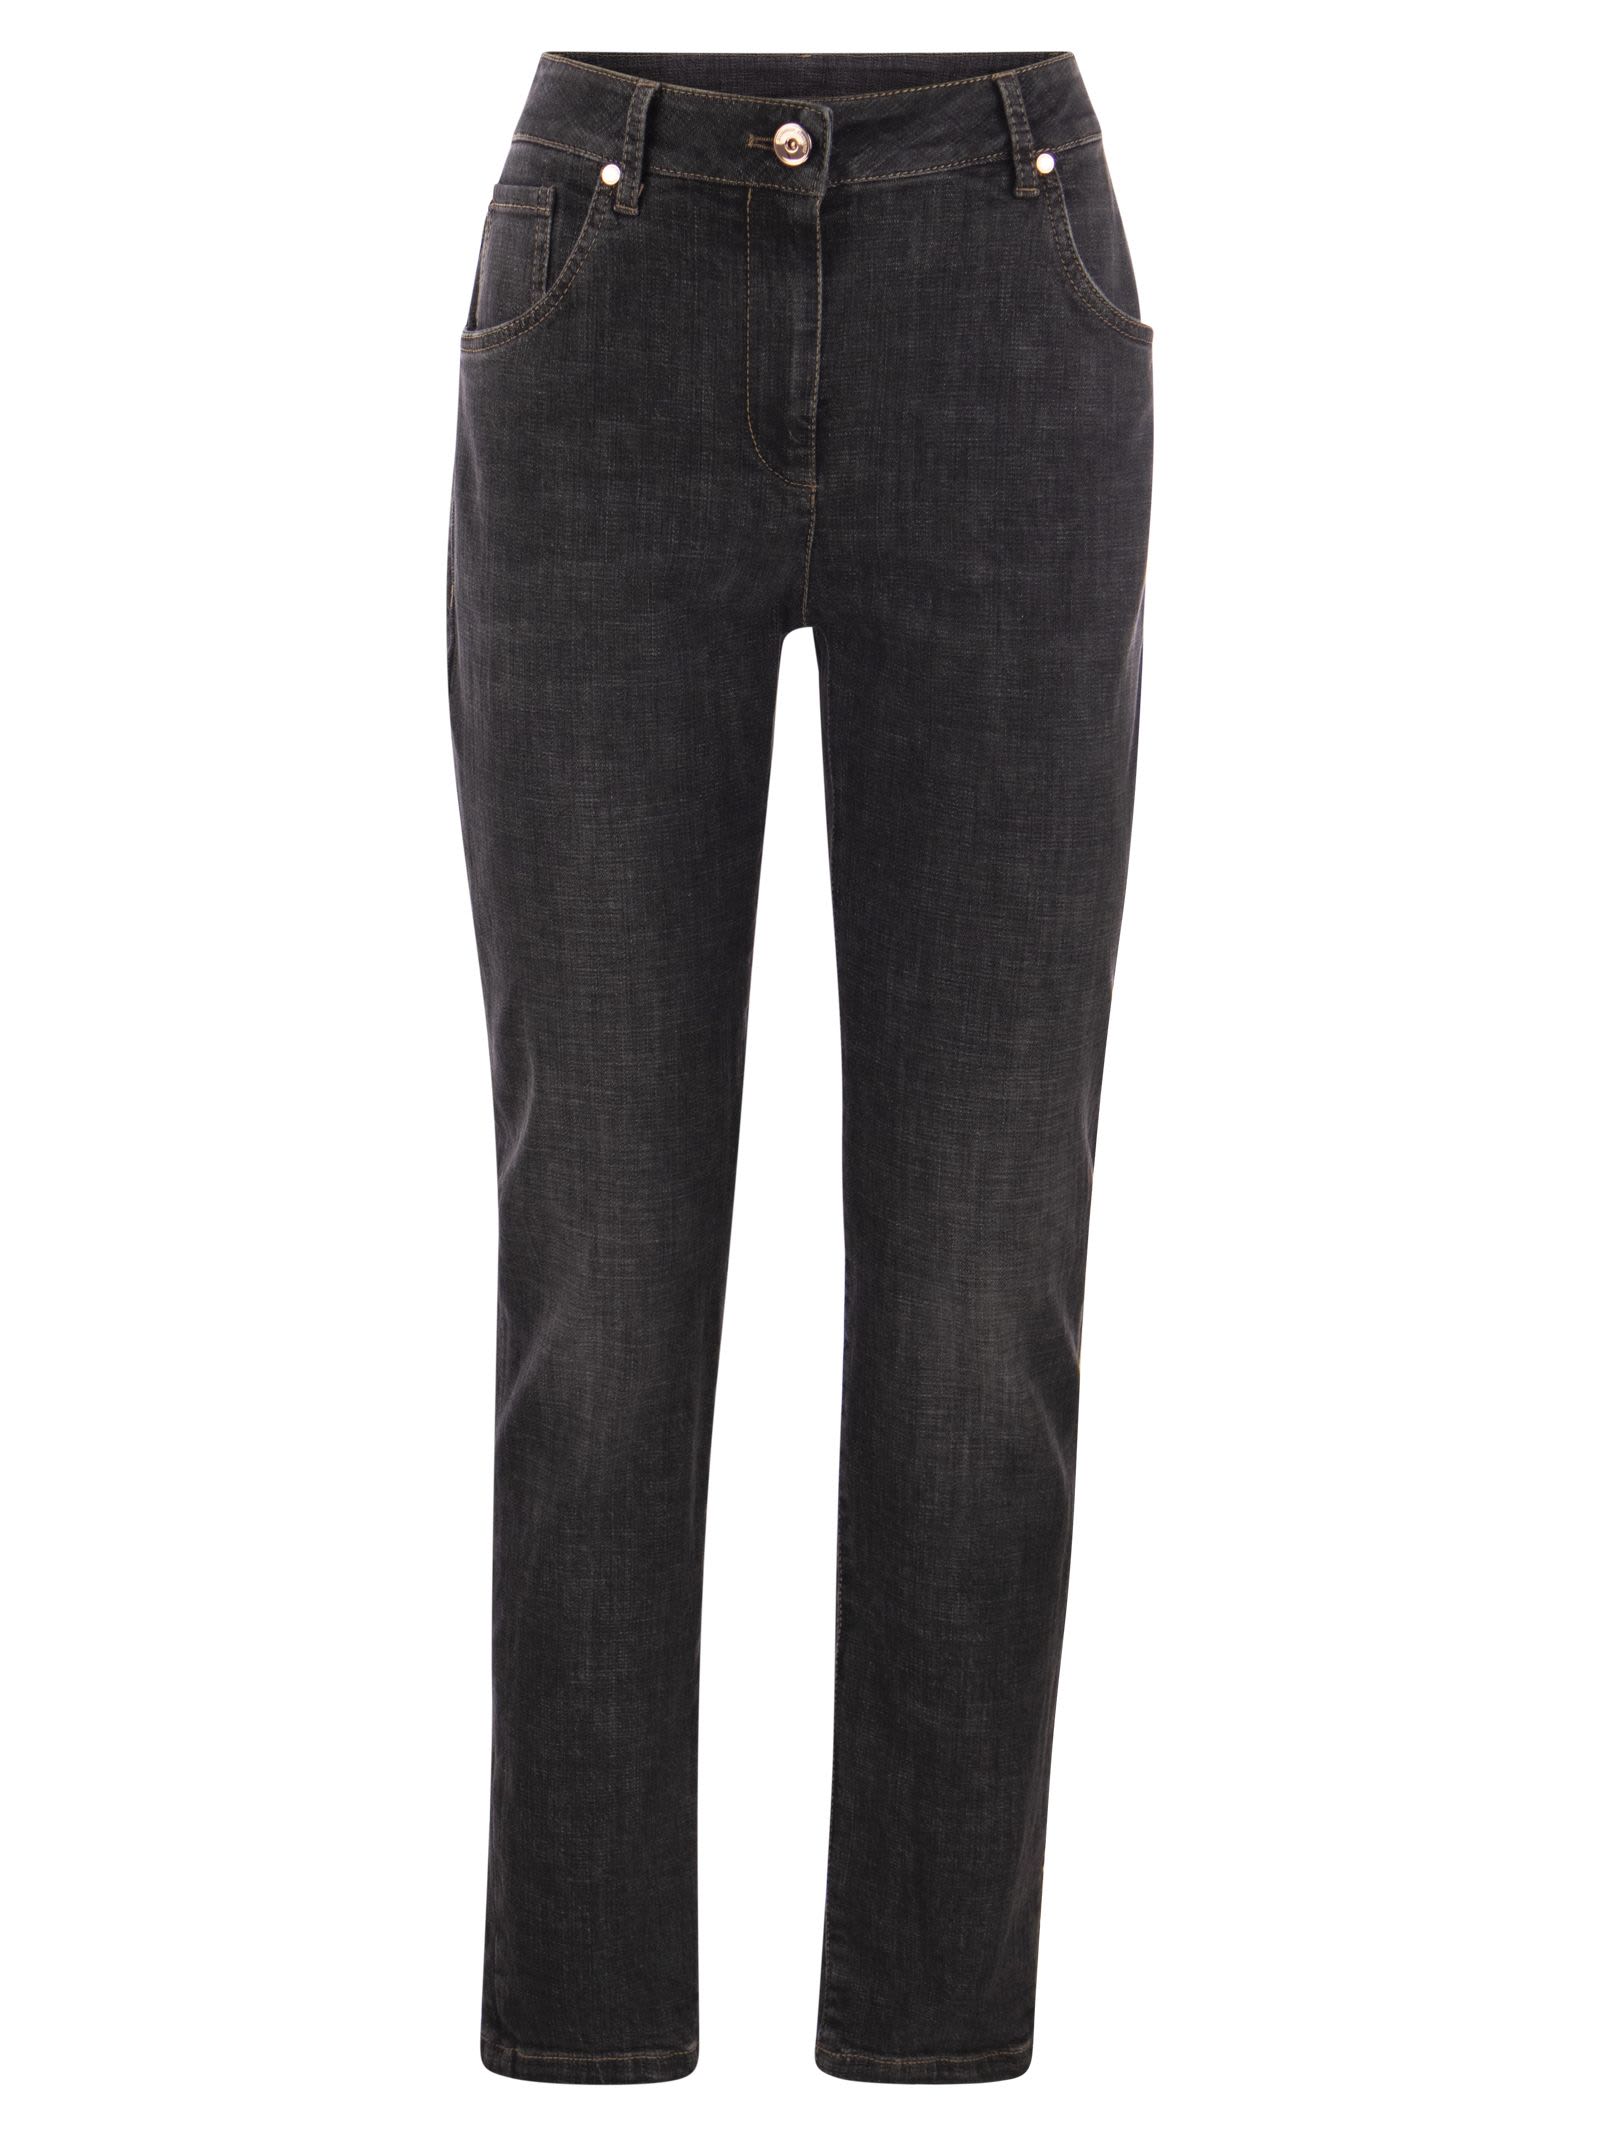 BRUNELLO CUCINELLI SLIM PANTS IN STRETCH DENIM WITH SHINY LEATHER TAB